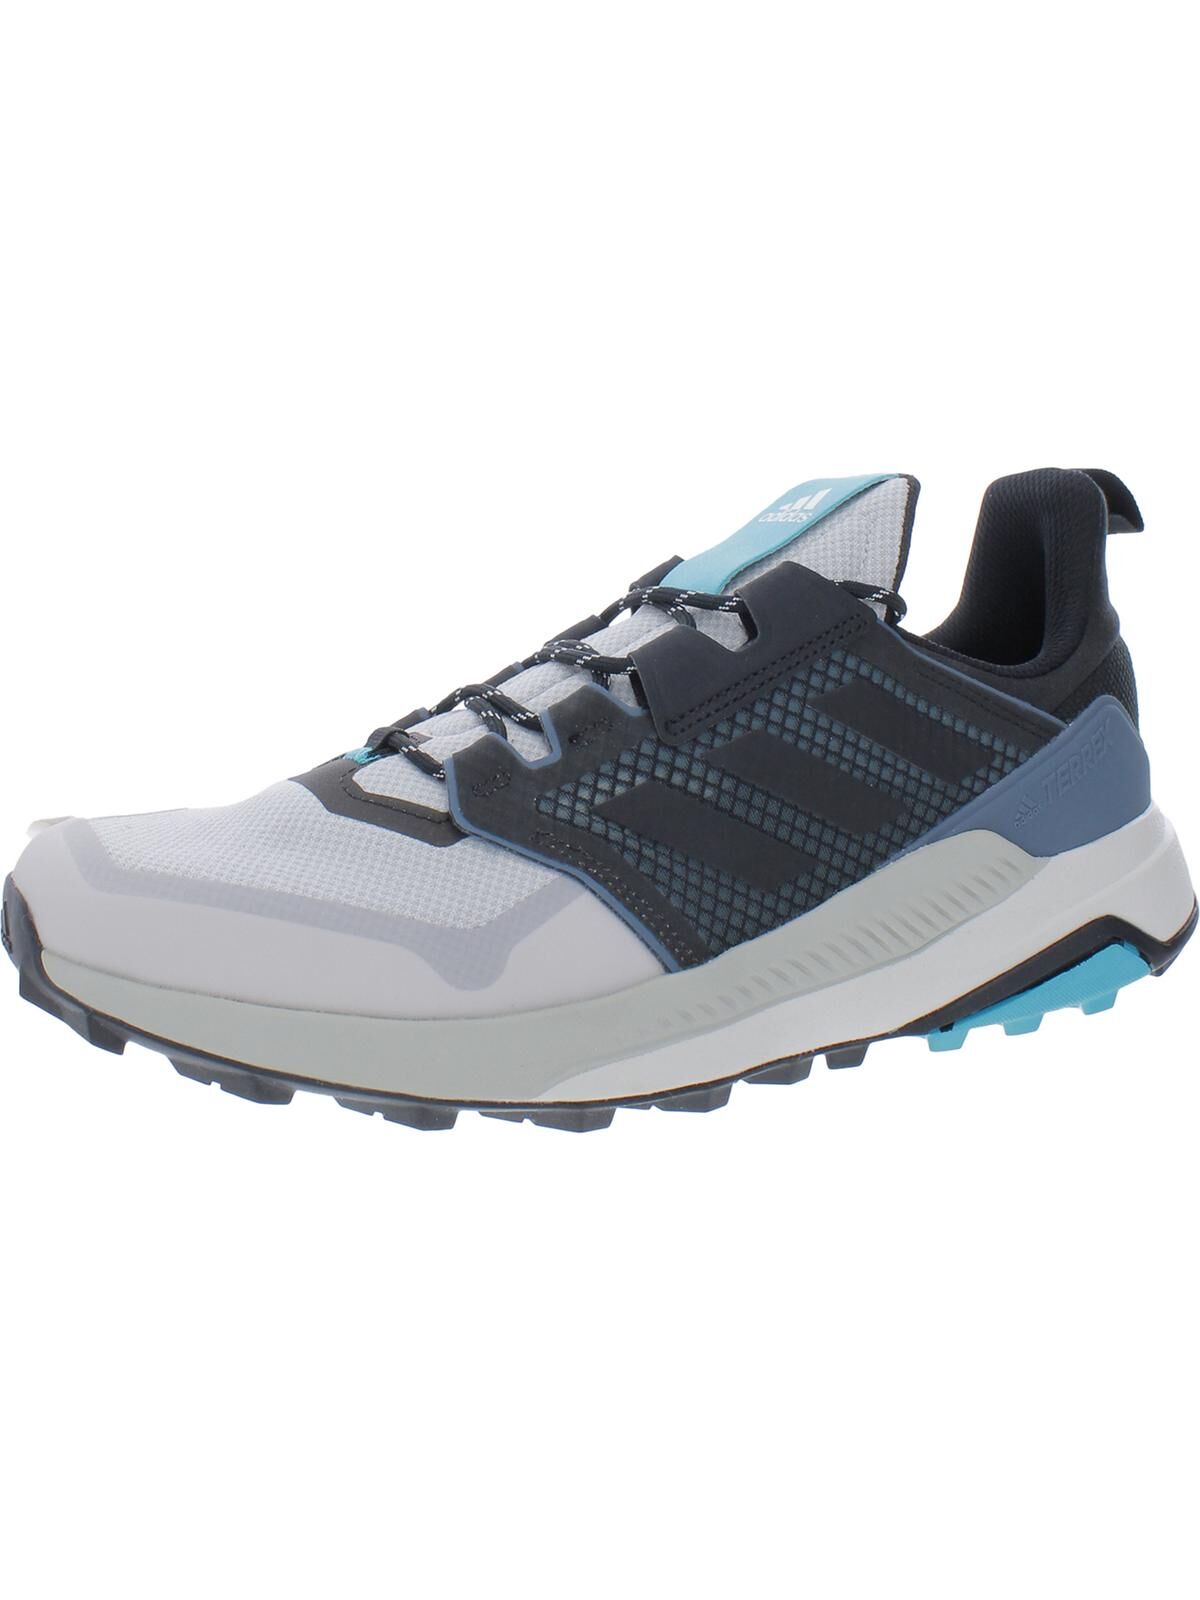 adidas Terrex Trailmaker Mens Outdoors Sport Hiking Shoes - grey - Size: US 12